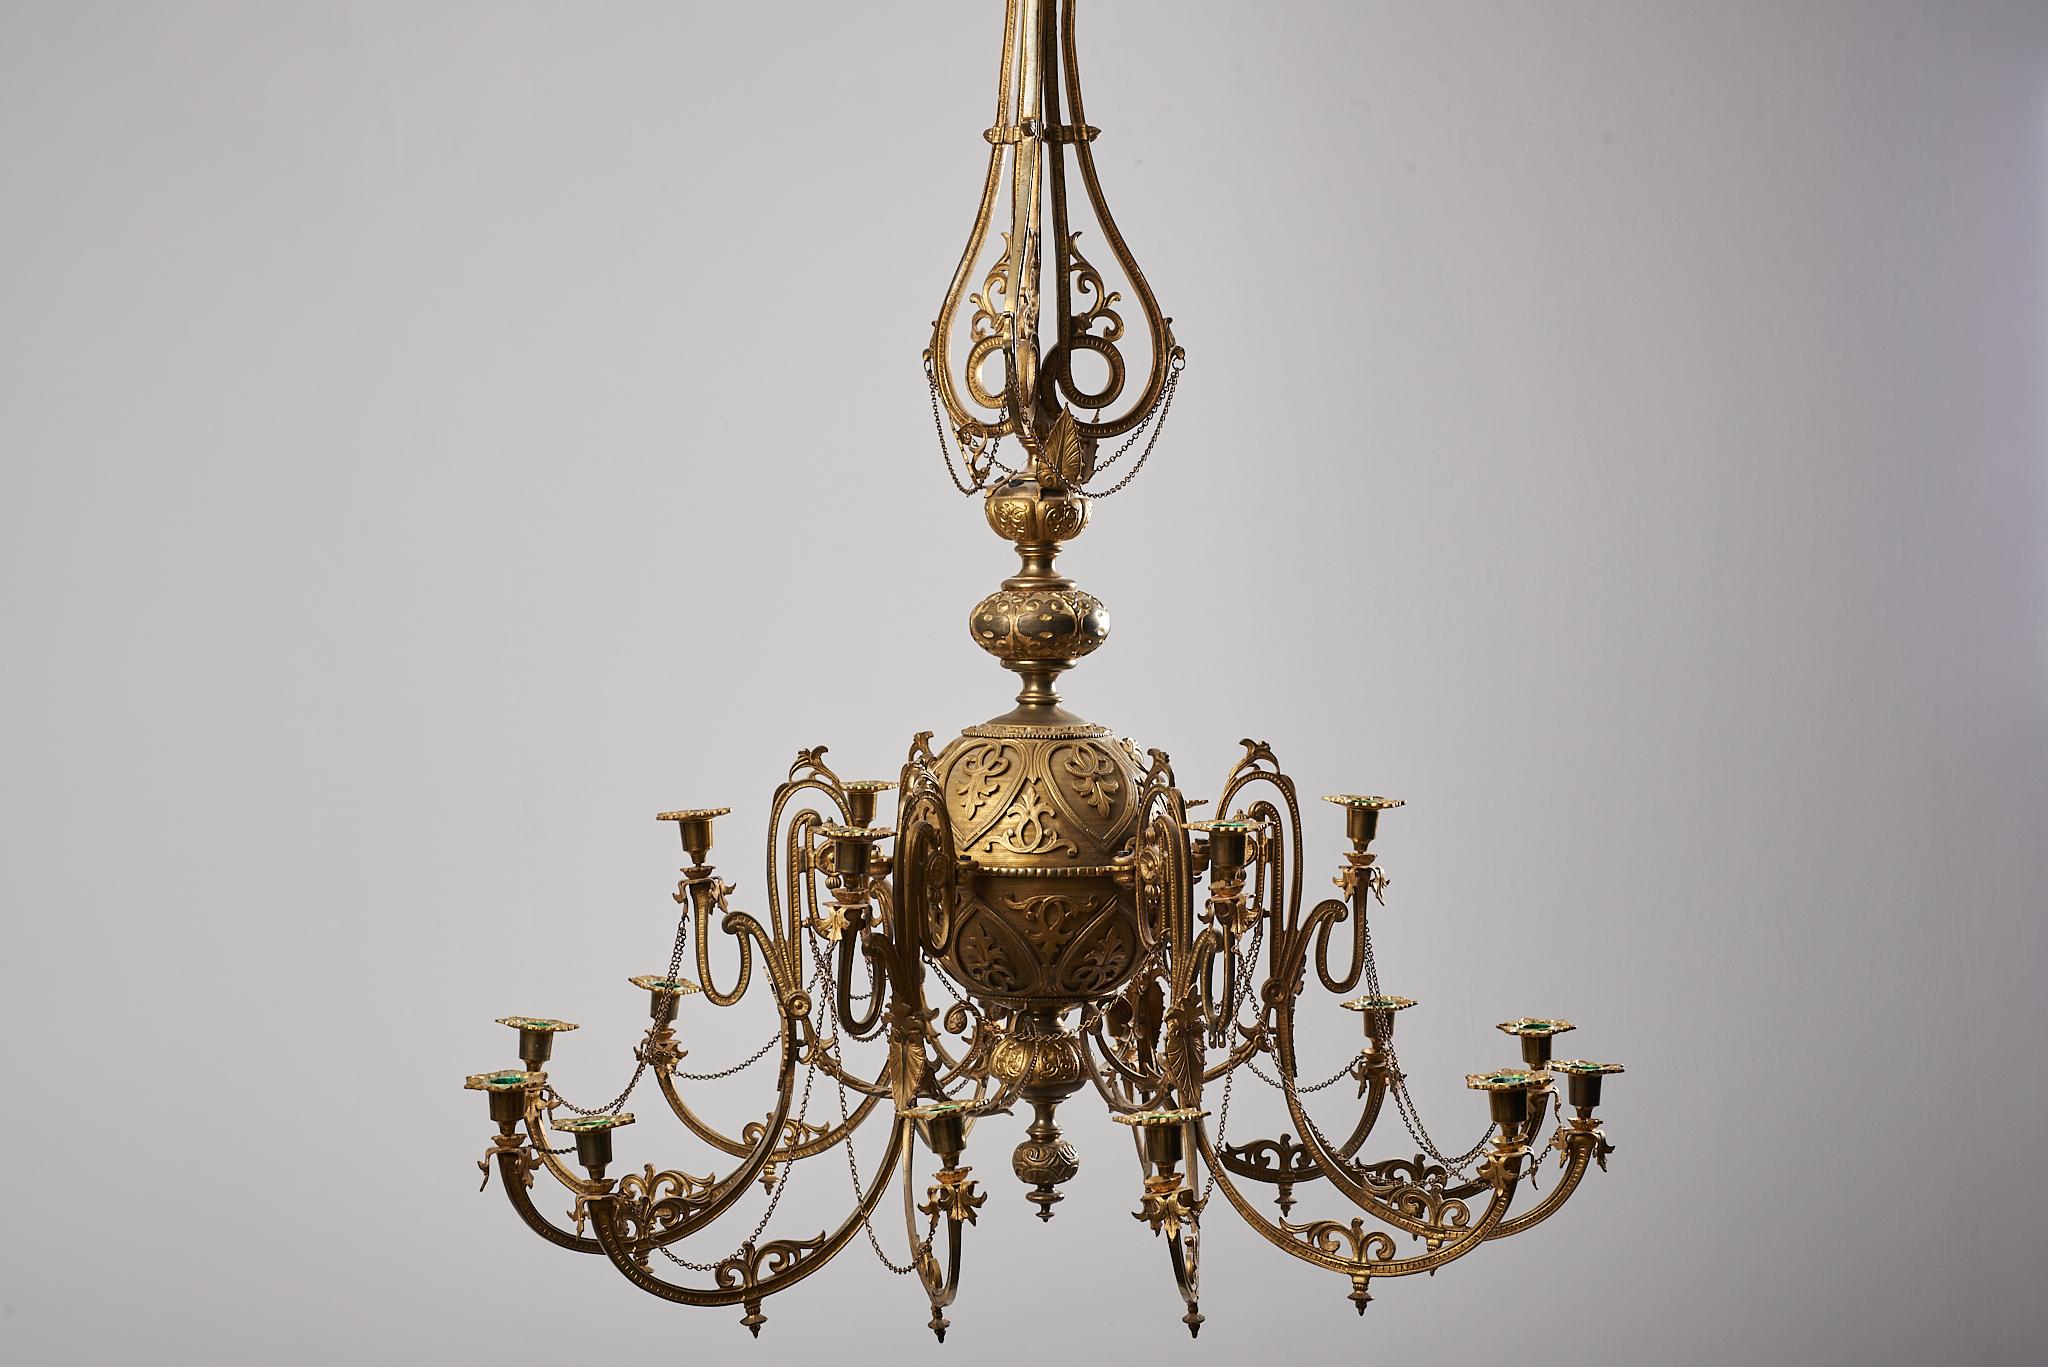 Hand-Crafted Antique Swedish Intricate Bronzed Chandelier For Sale